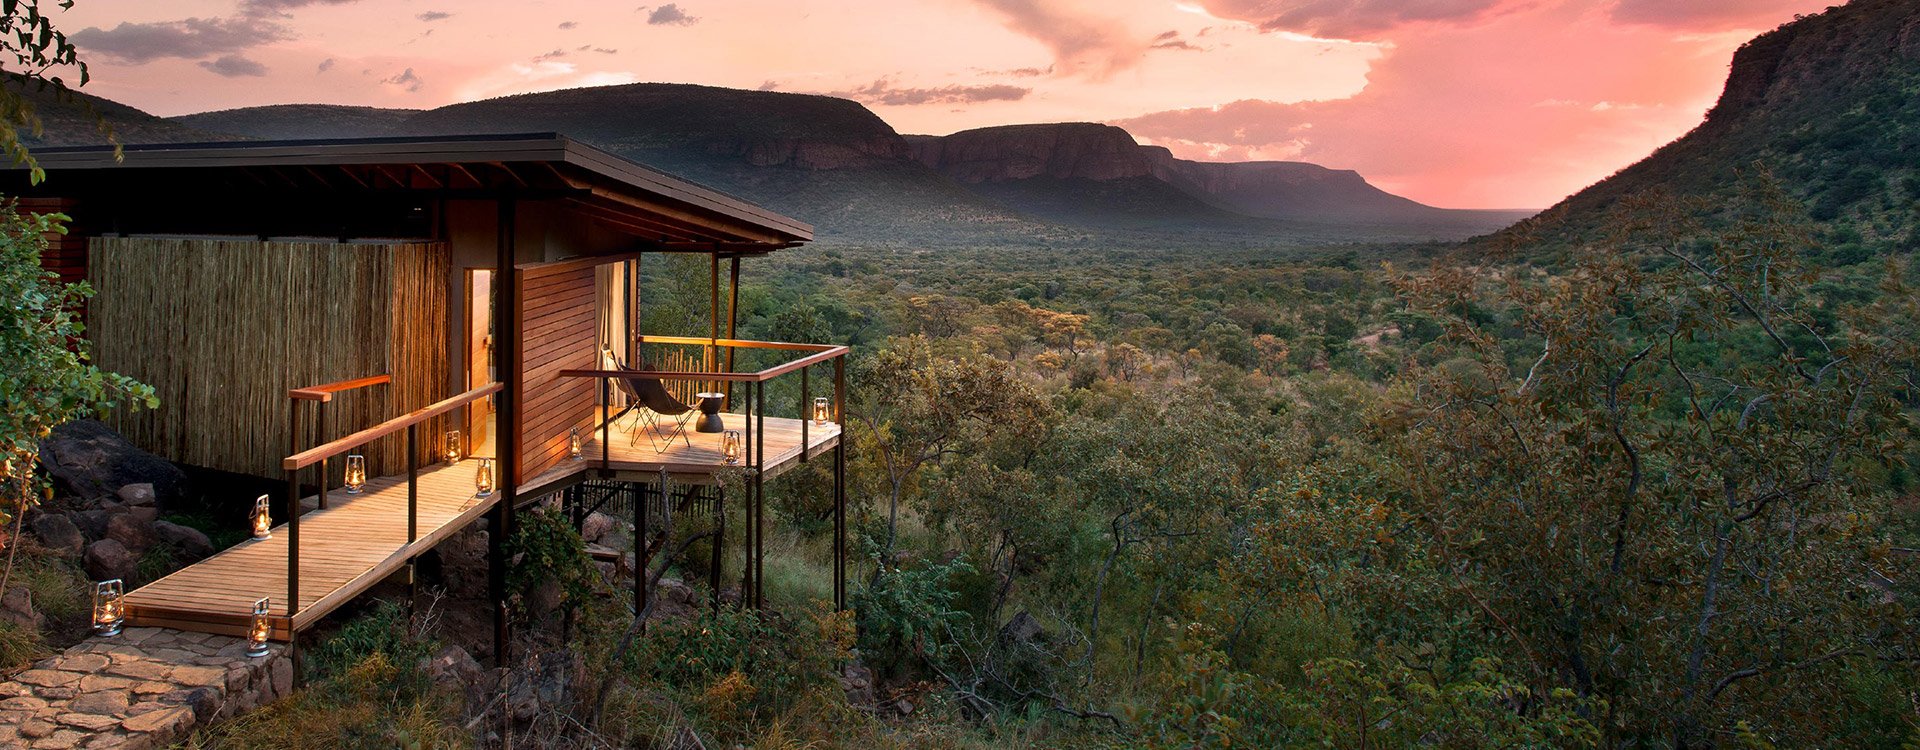 South Africa_Waterberg